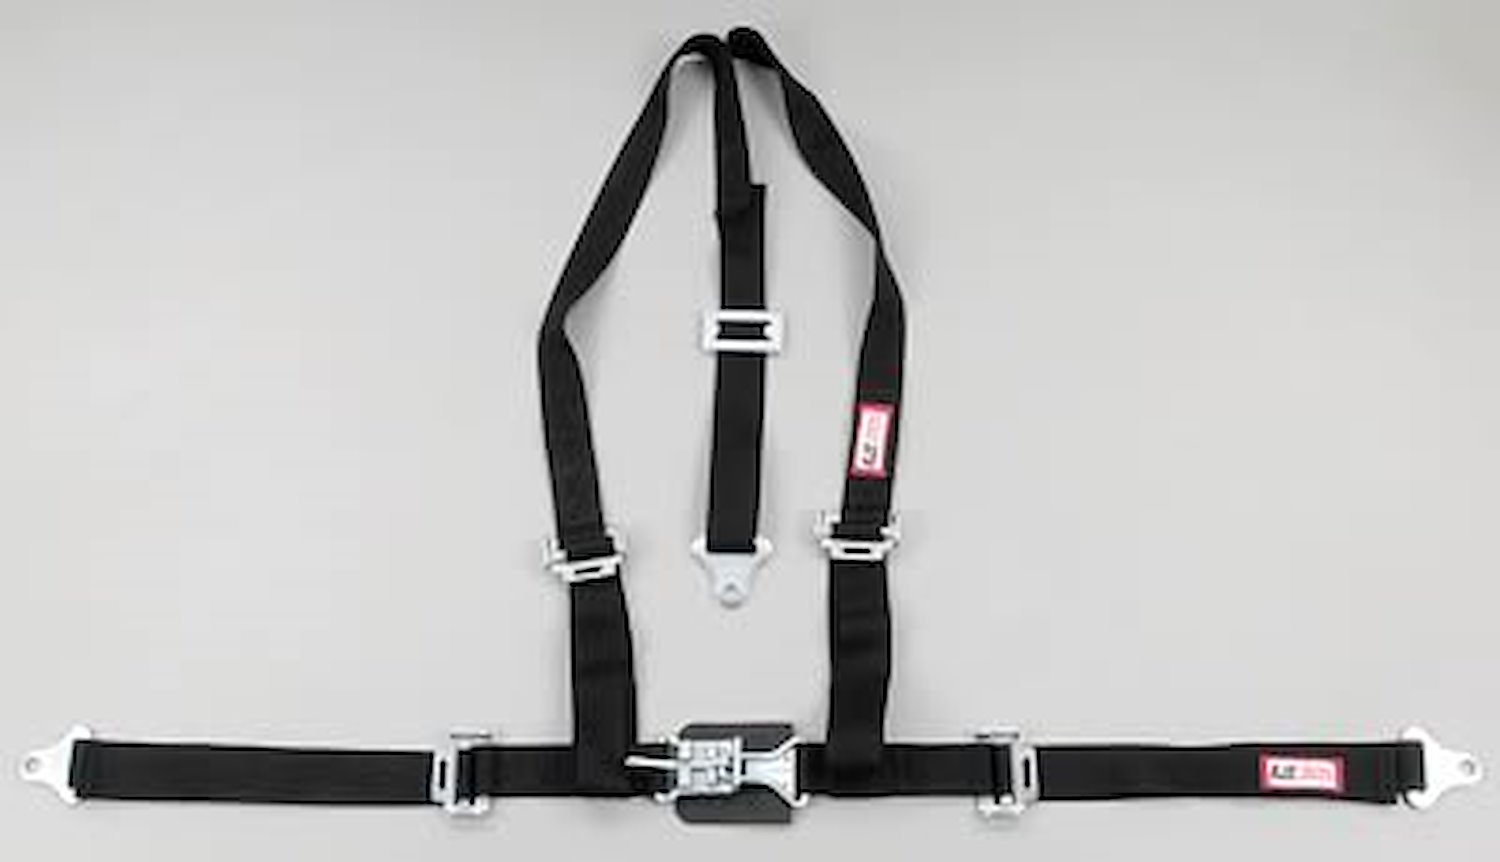 NON-SFI L&L HARNESS 2 PULL UP Lap Belt BOLT SEWN IN SEWN IN 2 S.H. INDIVIDUAL FLOOR Mount WRAP/BOLT BLACK